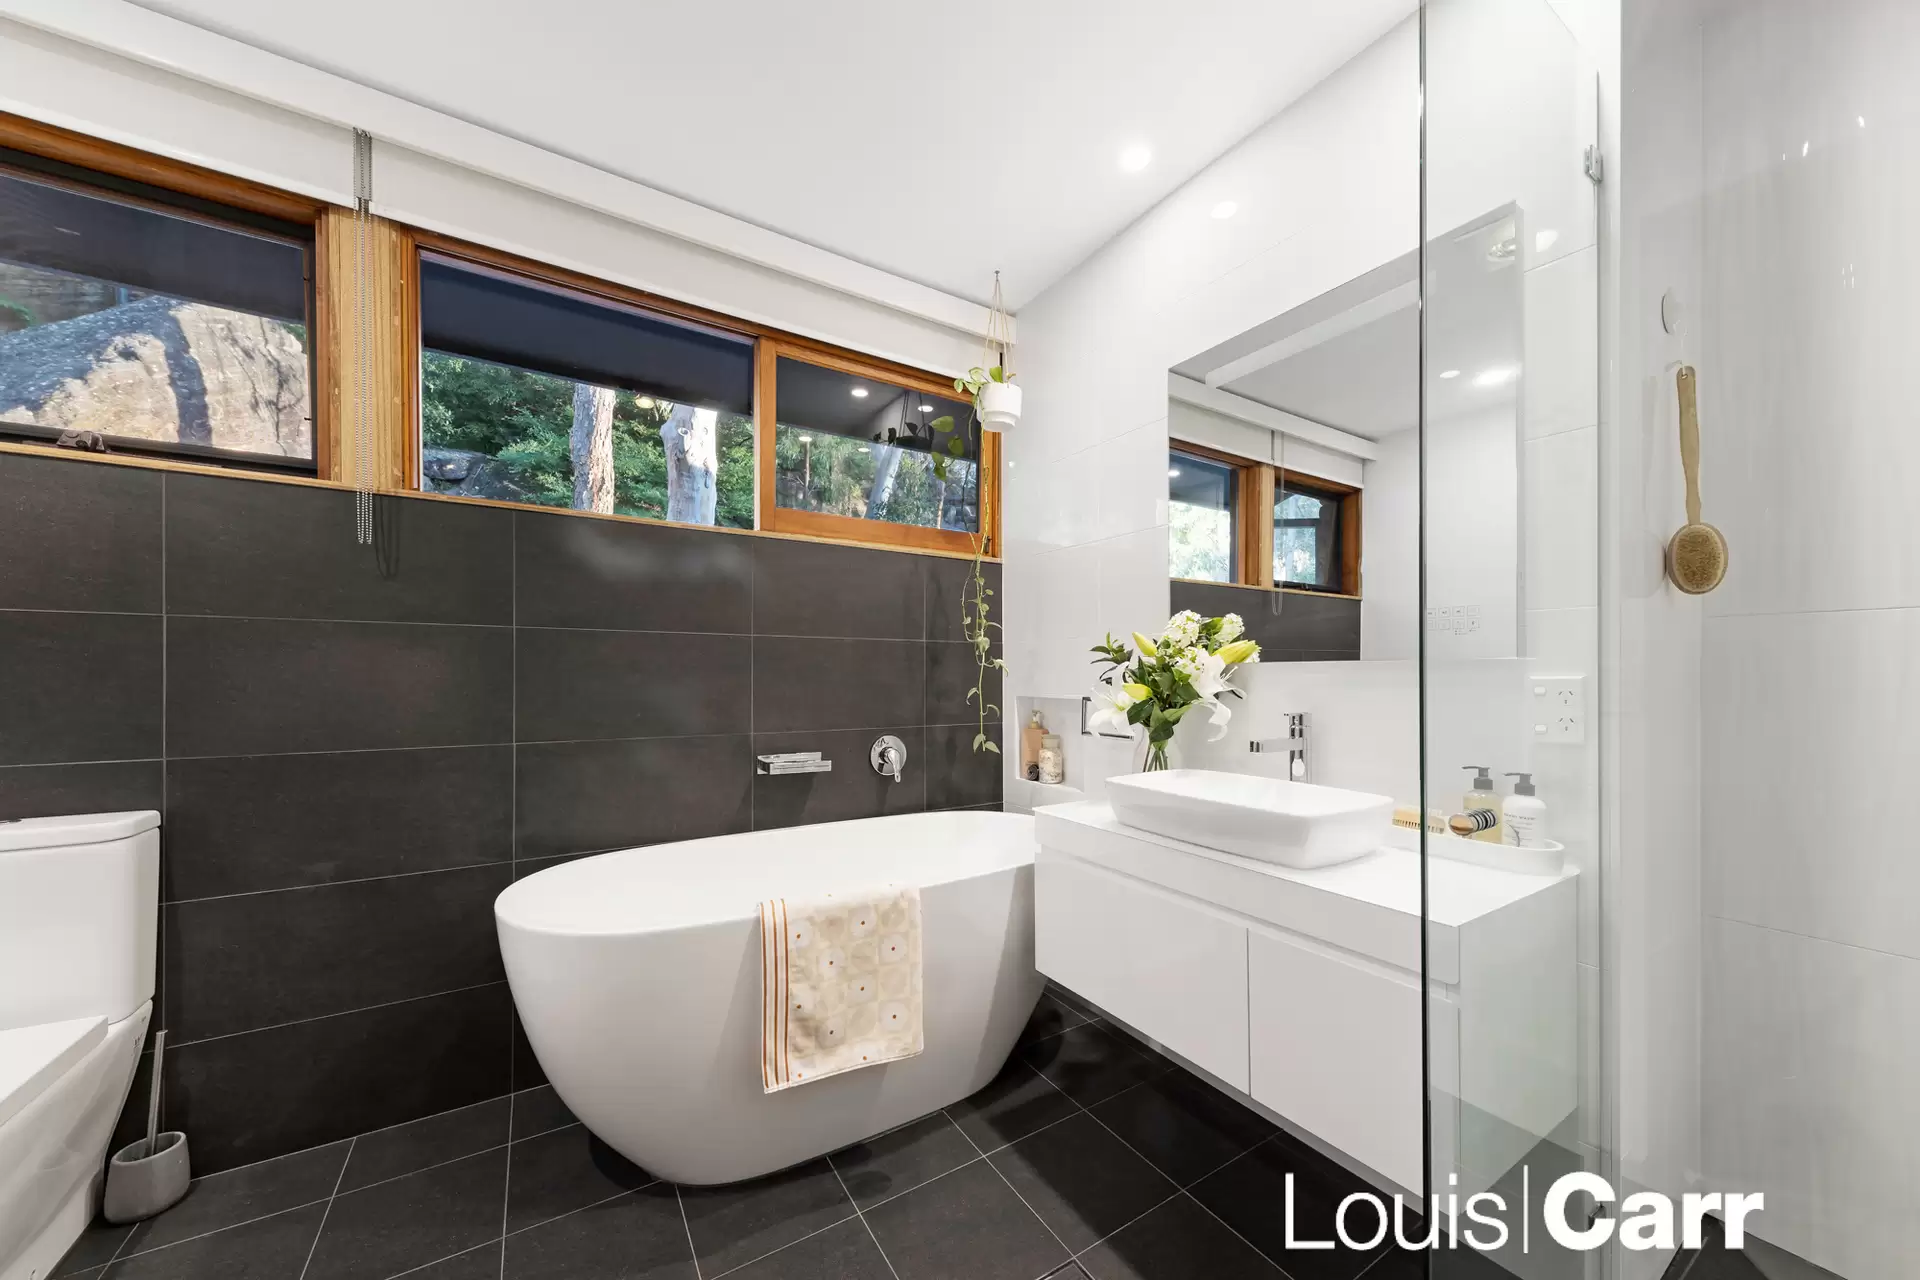 Photo #9: 11 Araluen Place, Glenhaven - Sold by Louis Carr Real Estate